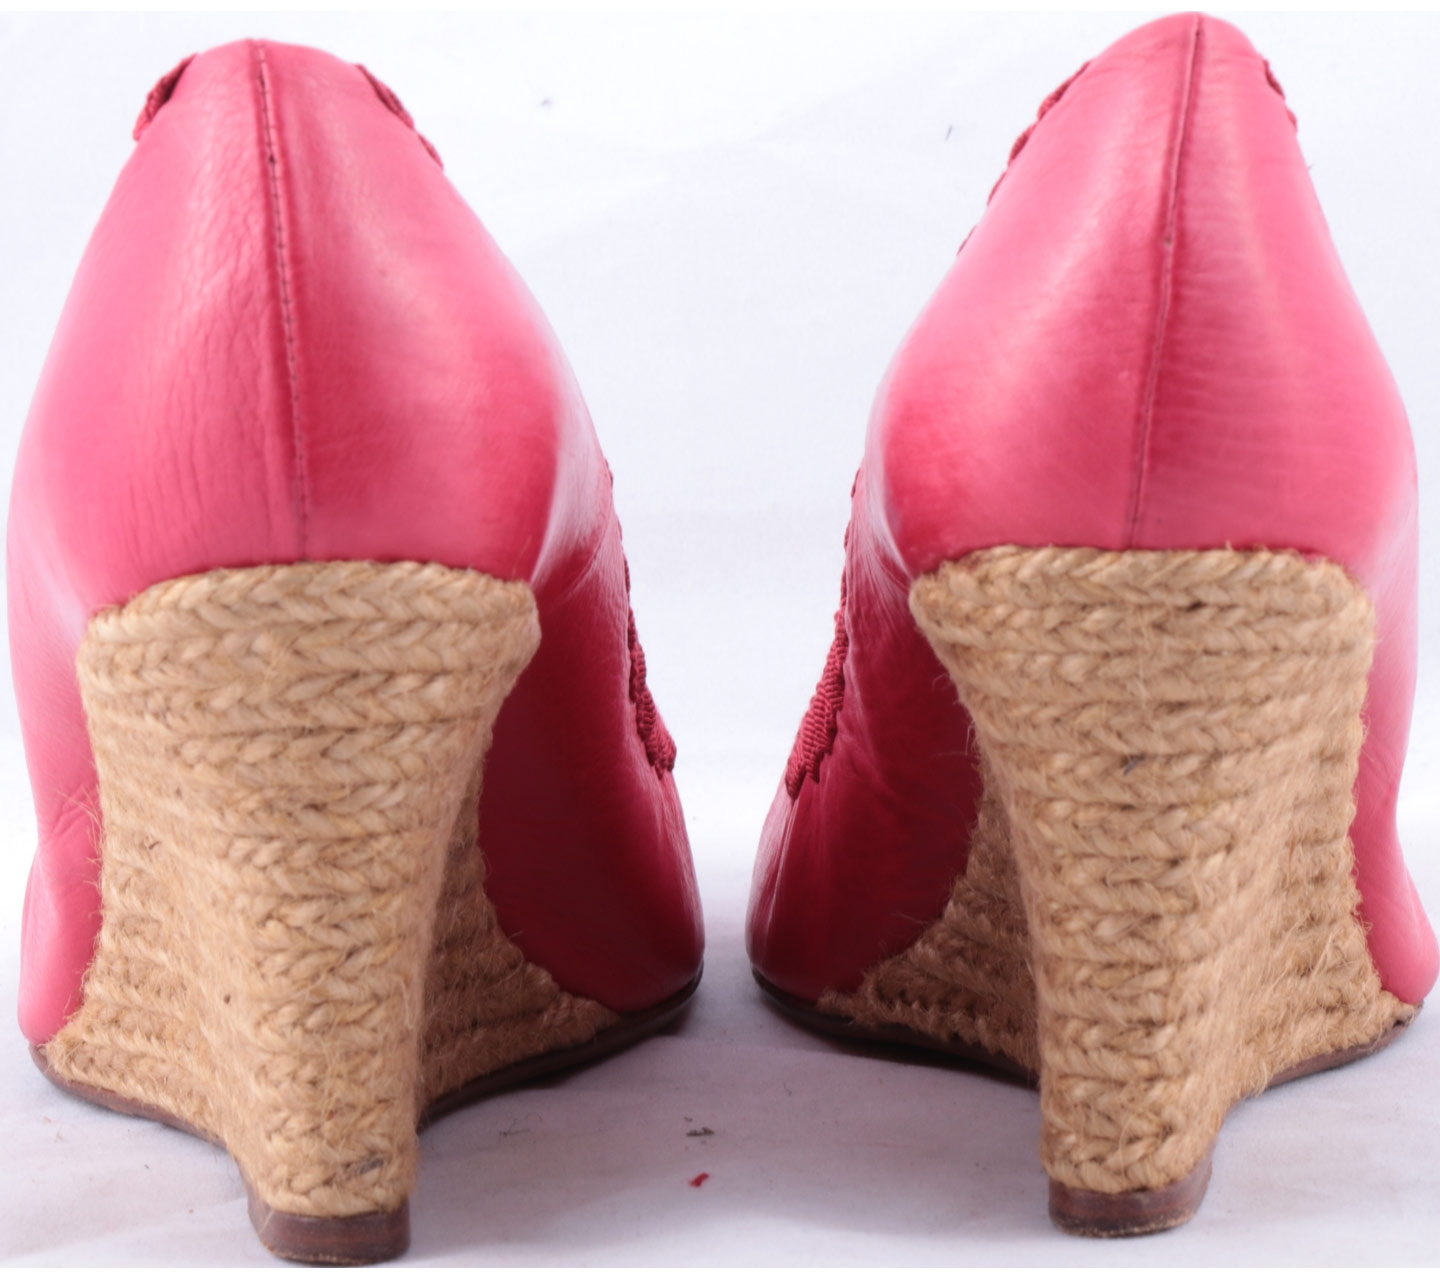 Lanvin Pink And Cream Wedges